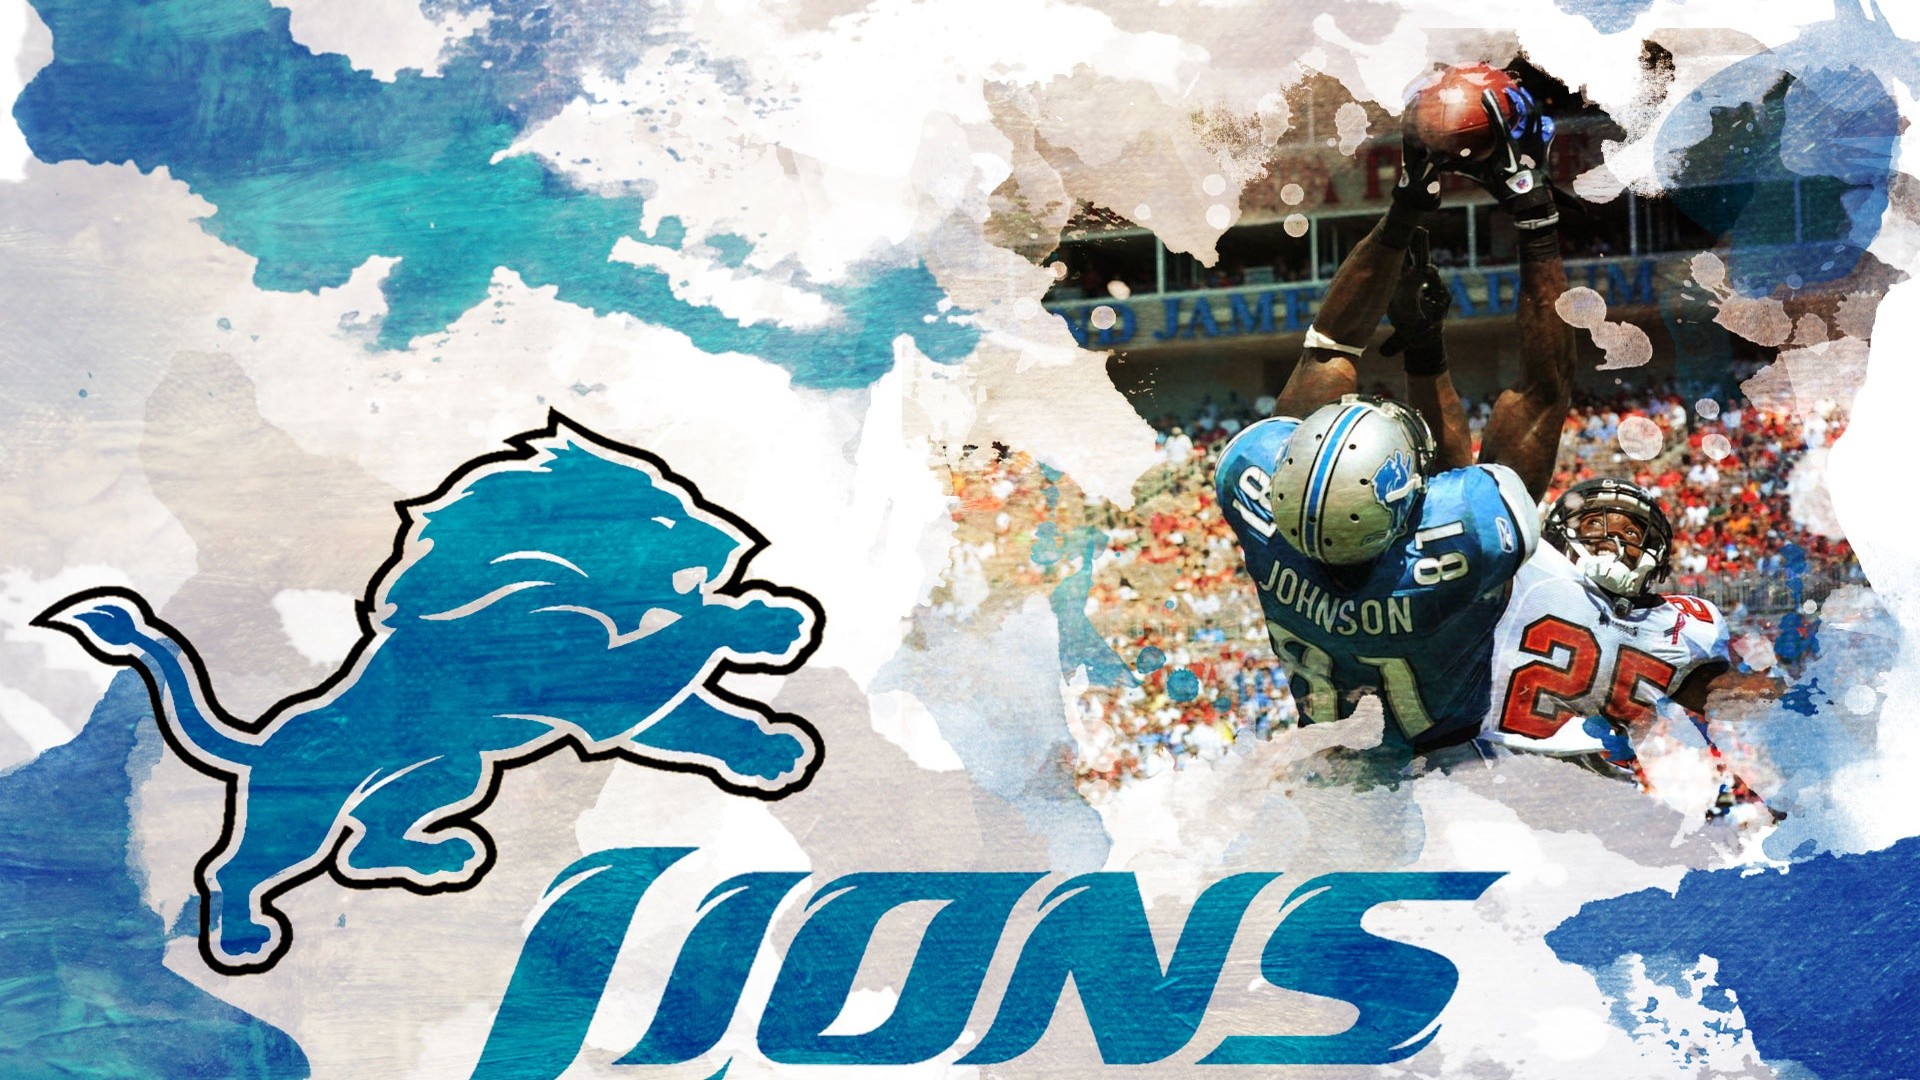 Awesome detroit lions wallpapers – photo . A Time Traveler Evades the Law Again and Again in Scifi